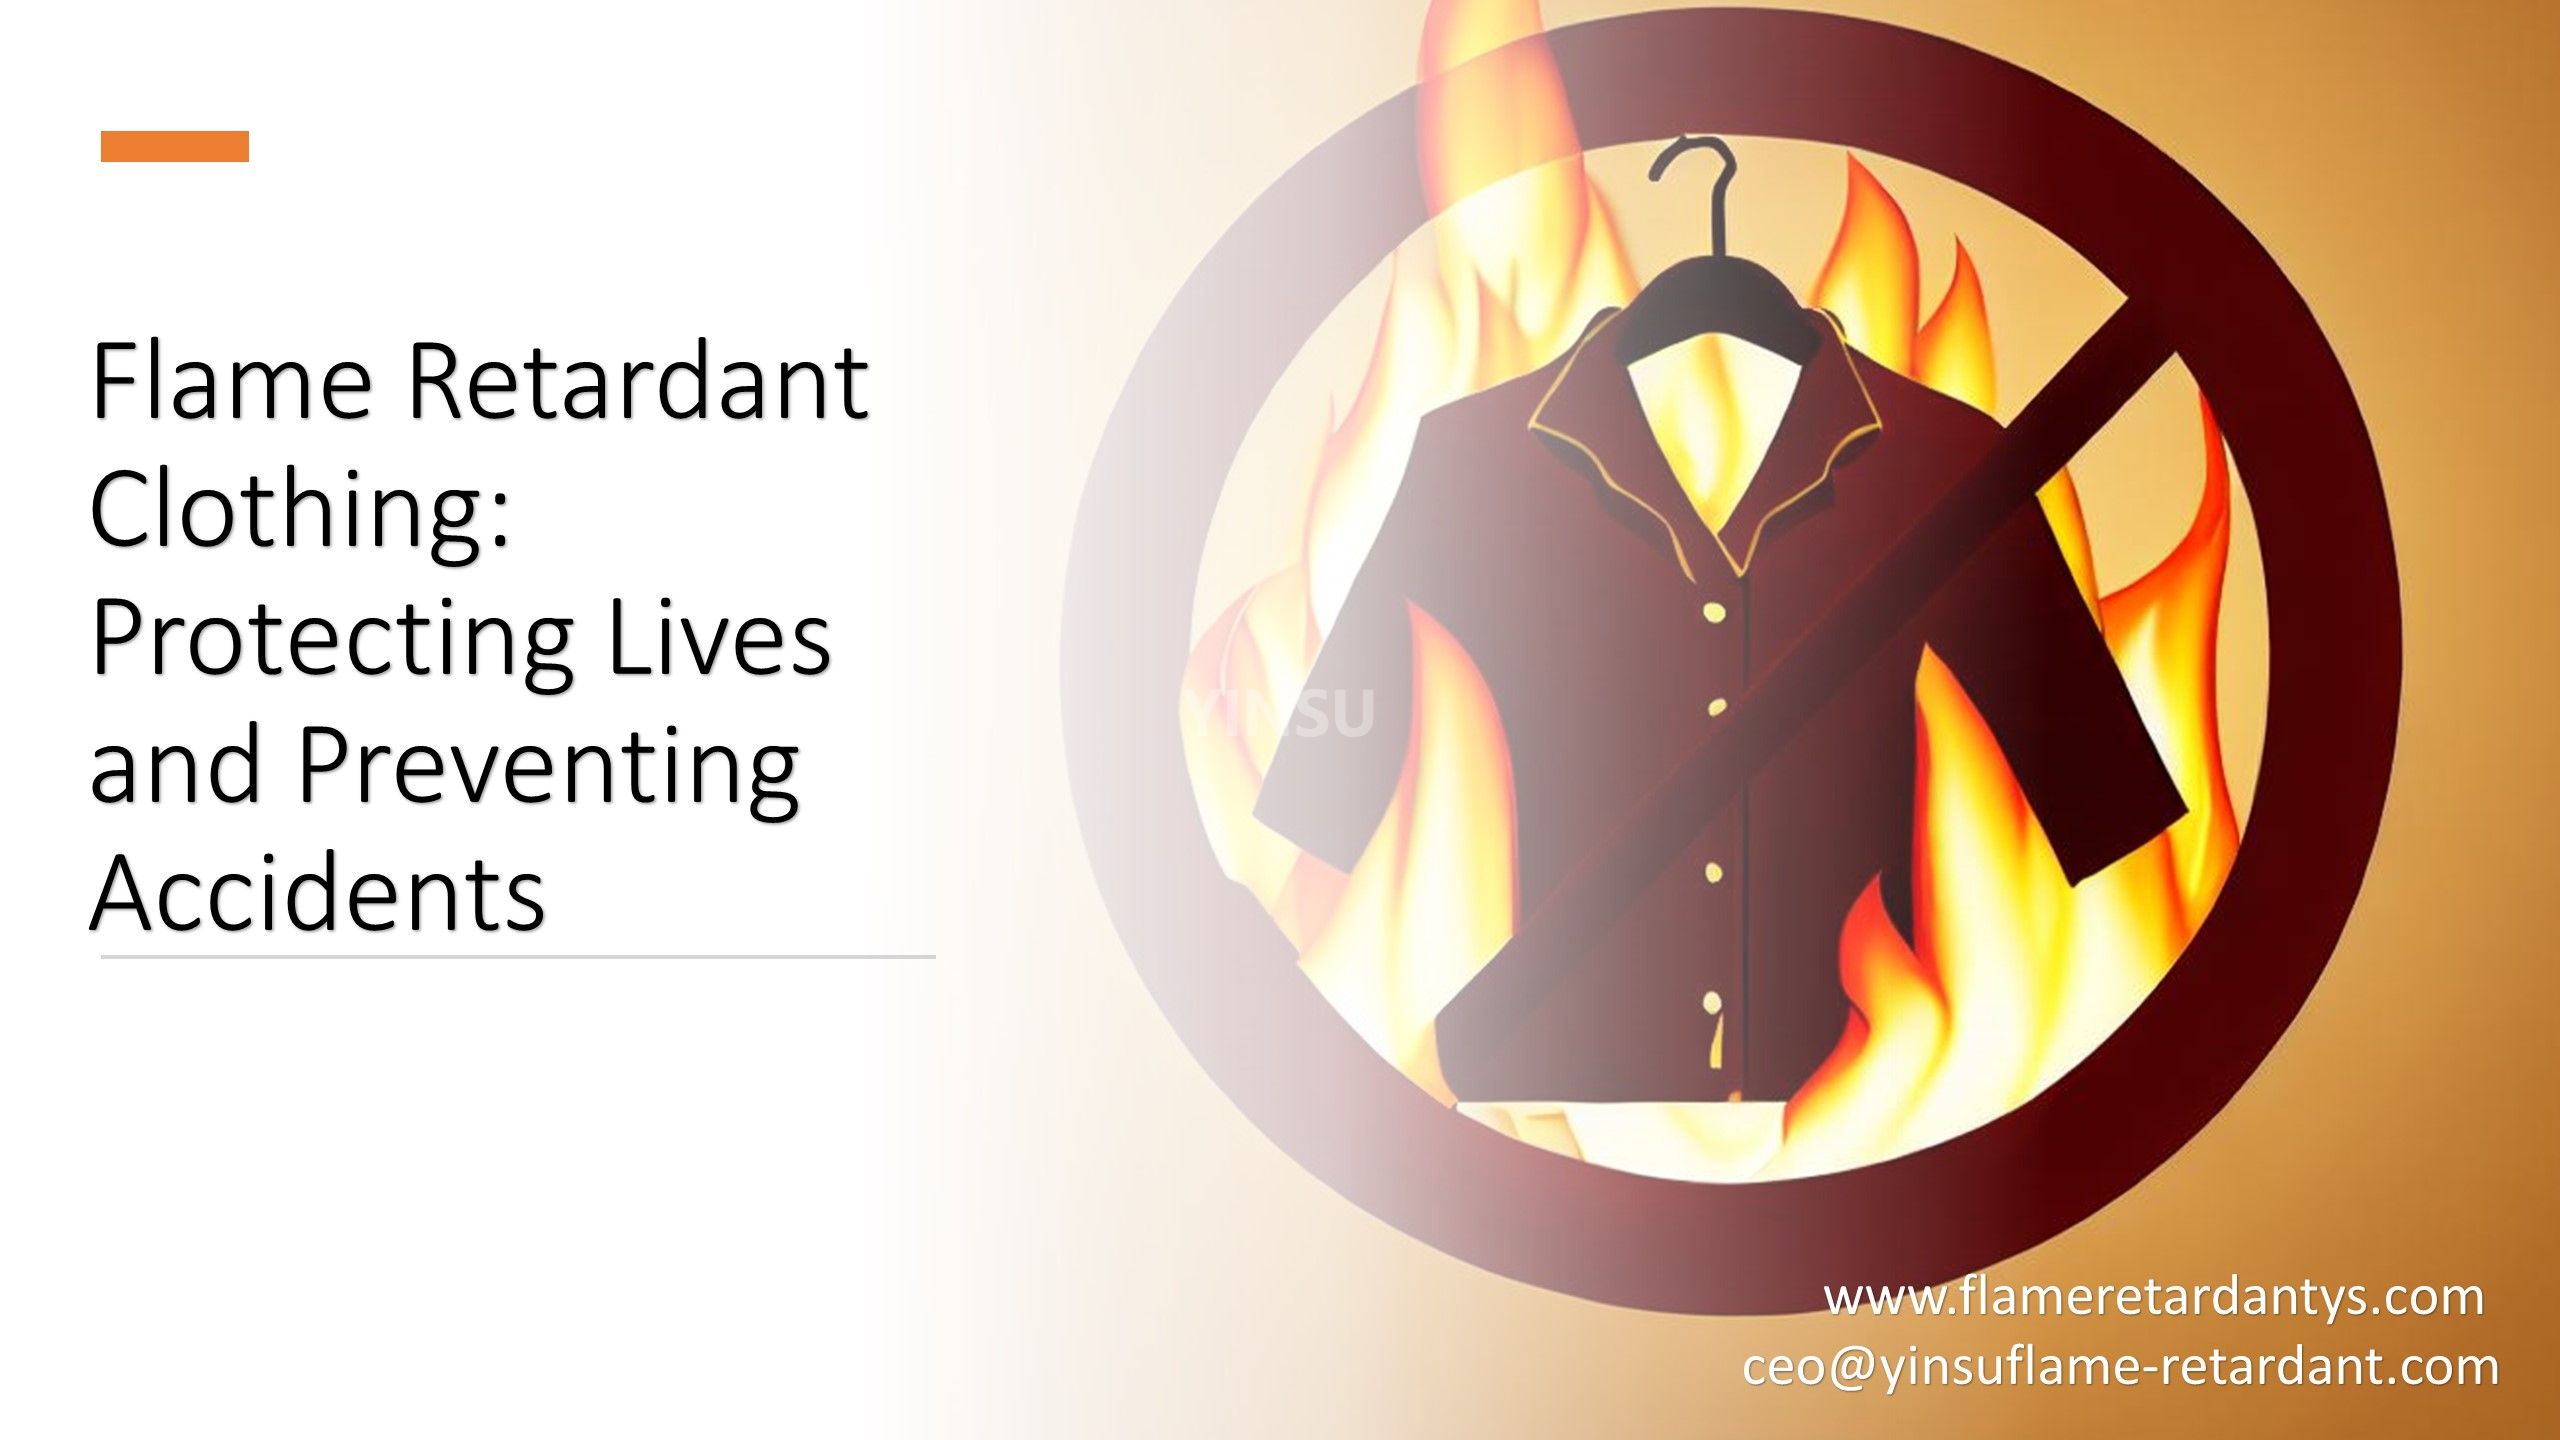 Flame Retardant Clothing: Protecting Lives and Preventing Accidents